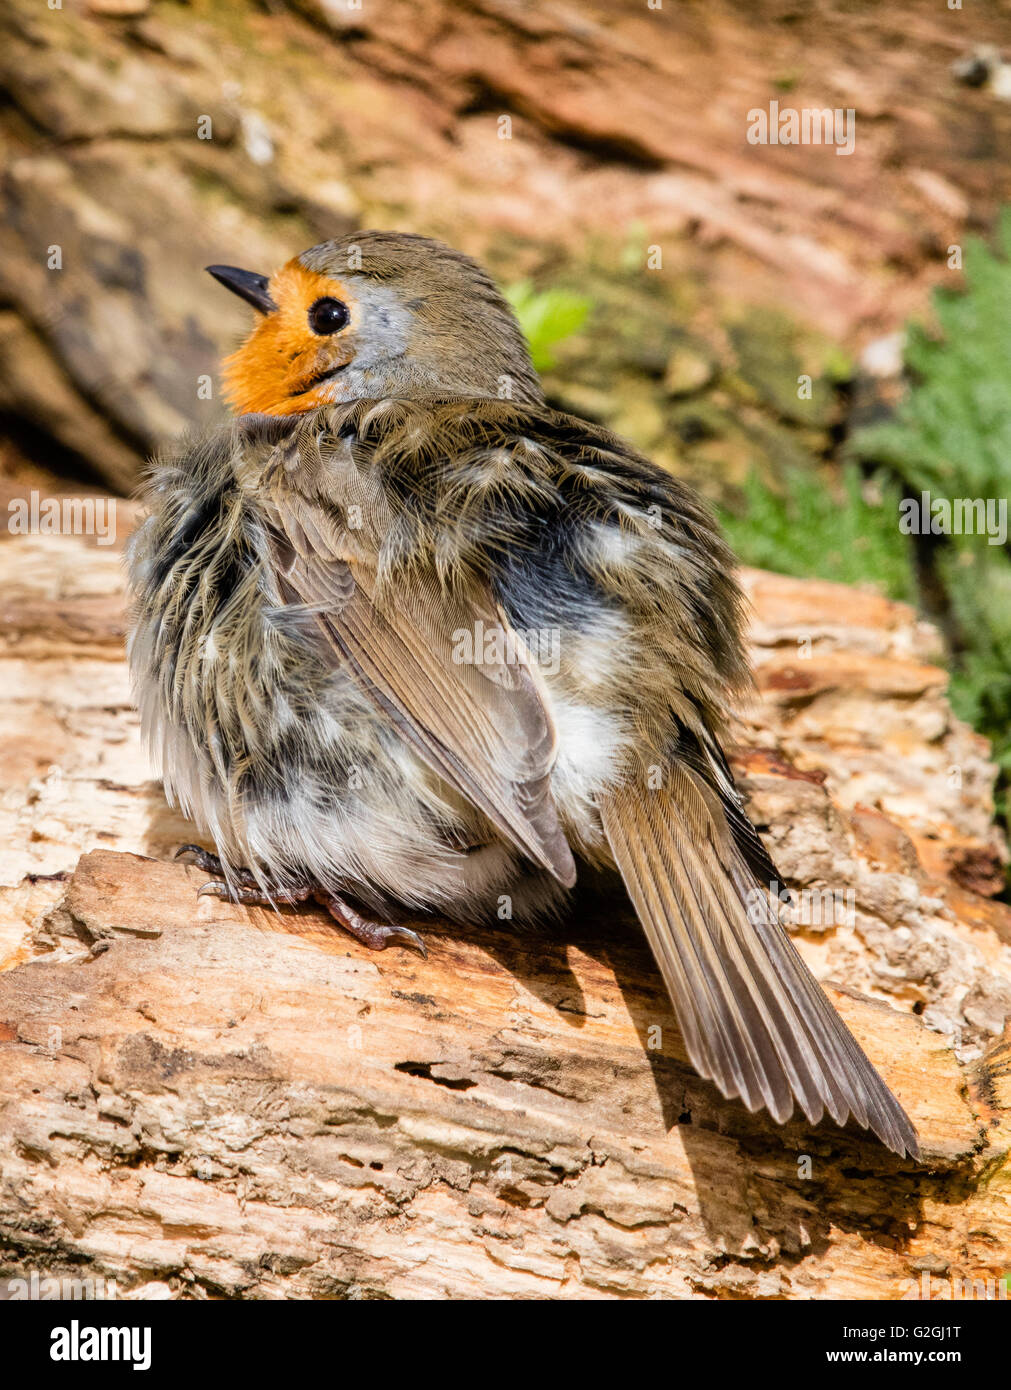 Robin ' sunning ' or fluffing up feathers to expose them to air and sunlight - Somerset UK Stock Photo